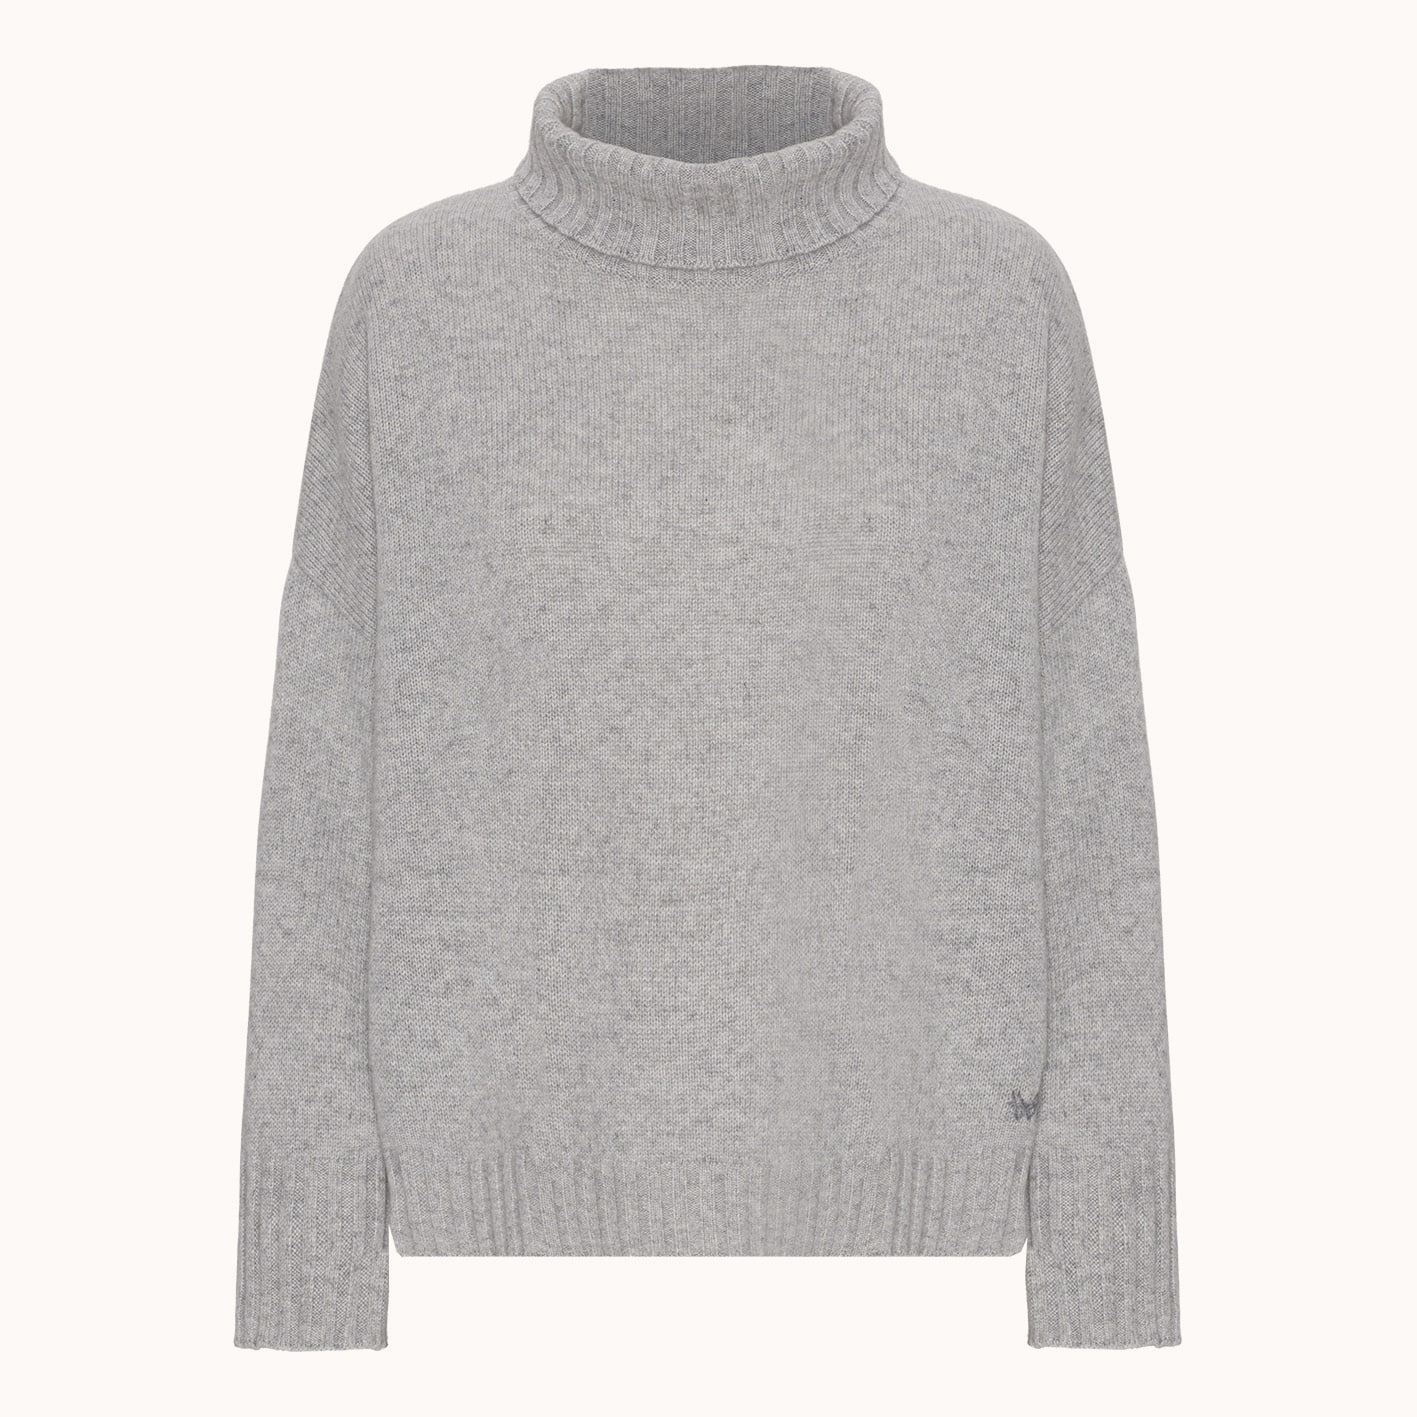 Women's oversized cashmere turtleneck in 100% superior cashmere from Inner Mongolia from Wuth Copenhagen.